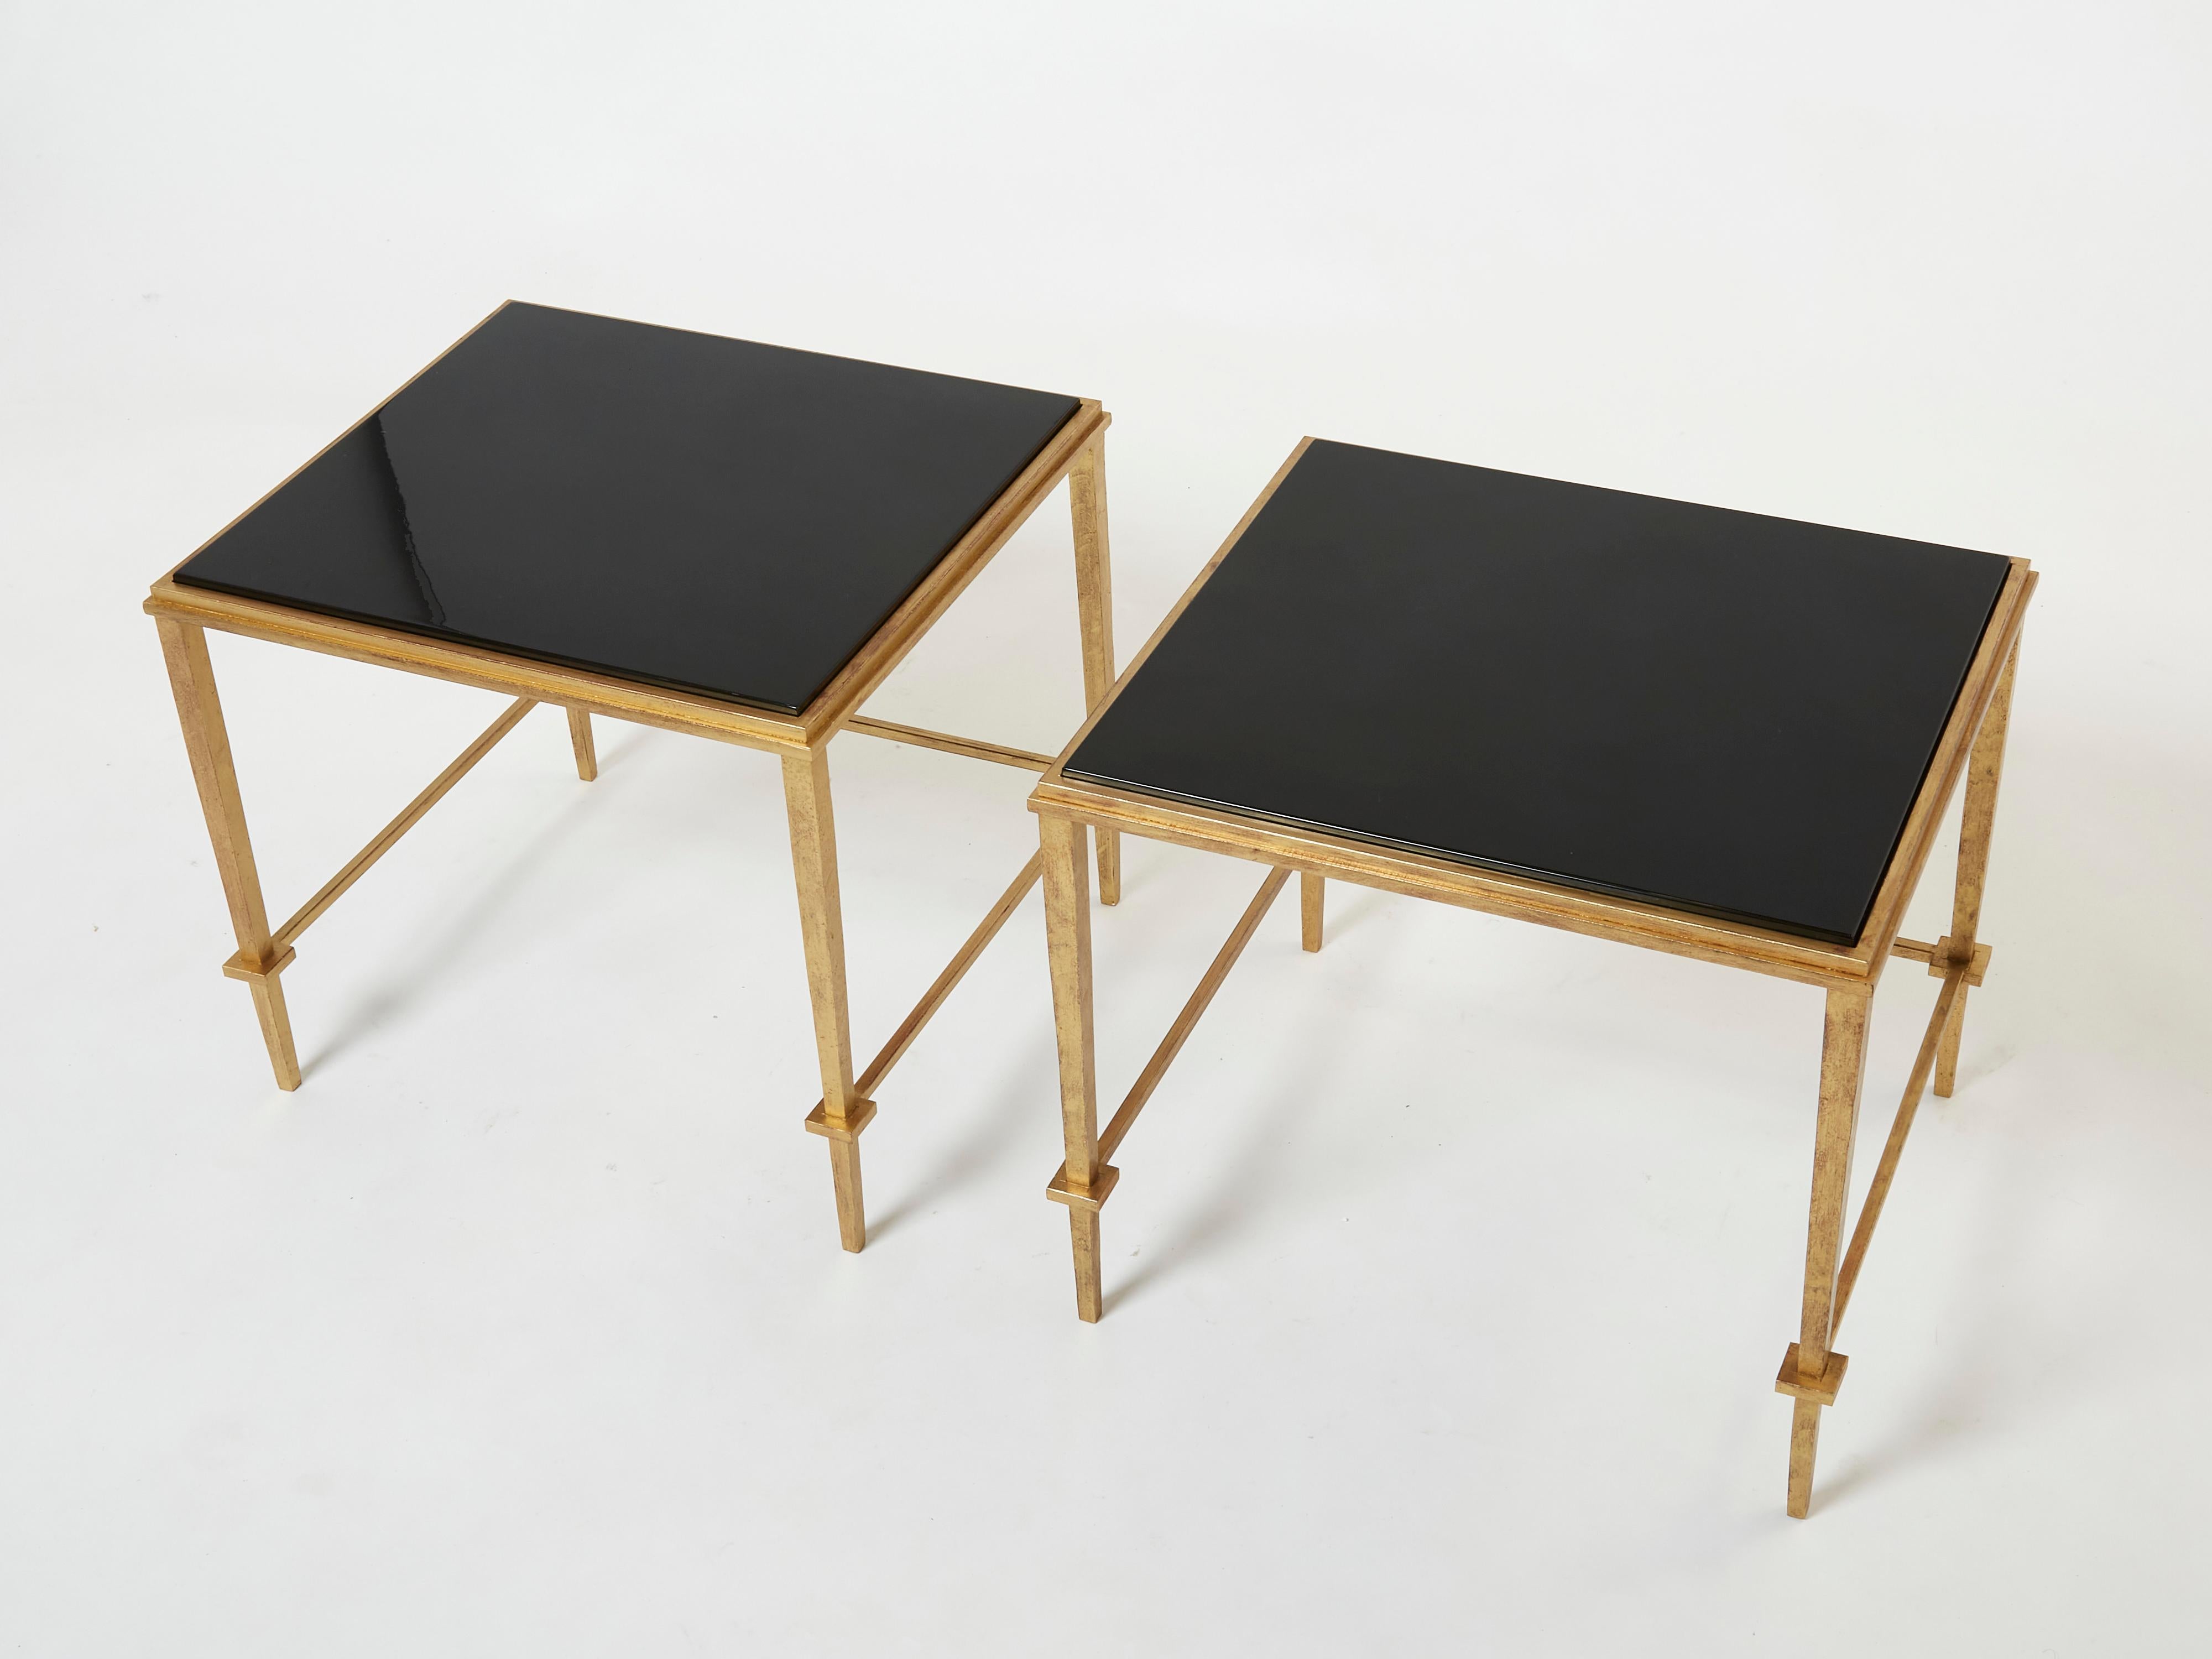 This beautiful pair of end tables, or side tables, by Maison Ramsay are from the 1950s, and carry with them the elegant mood of the neoclassical post art deco period. The wrought iron feet are glittering in an antiqued gold gilt finish, while the